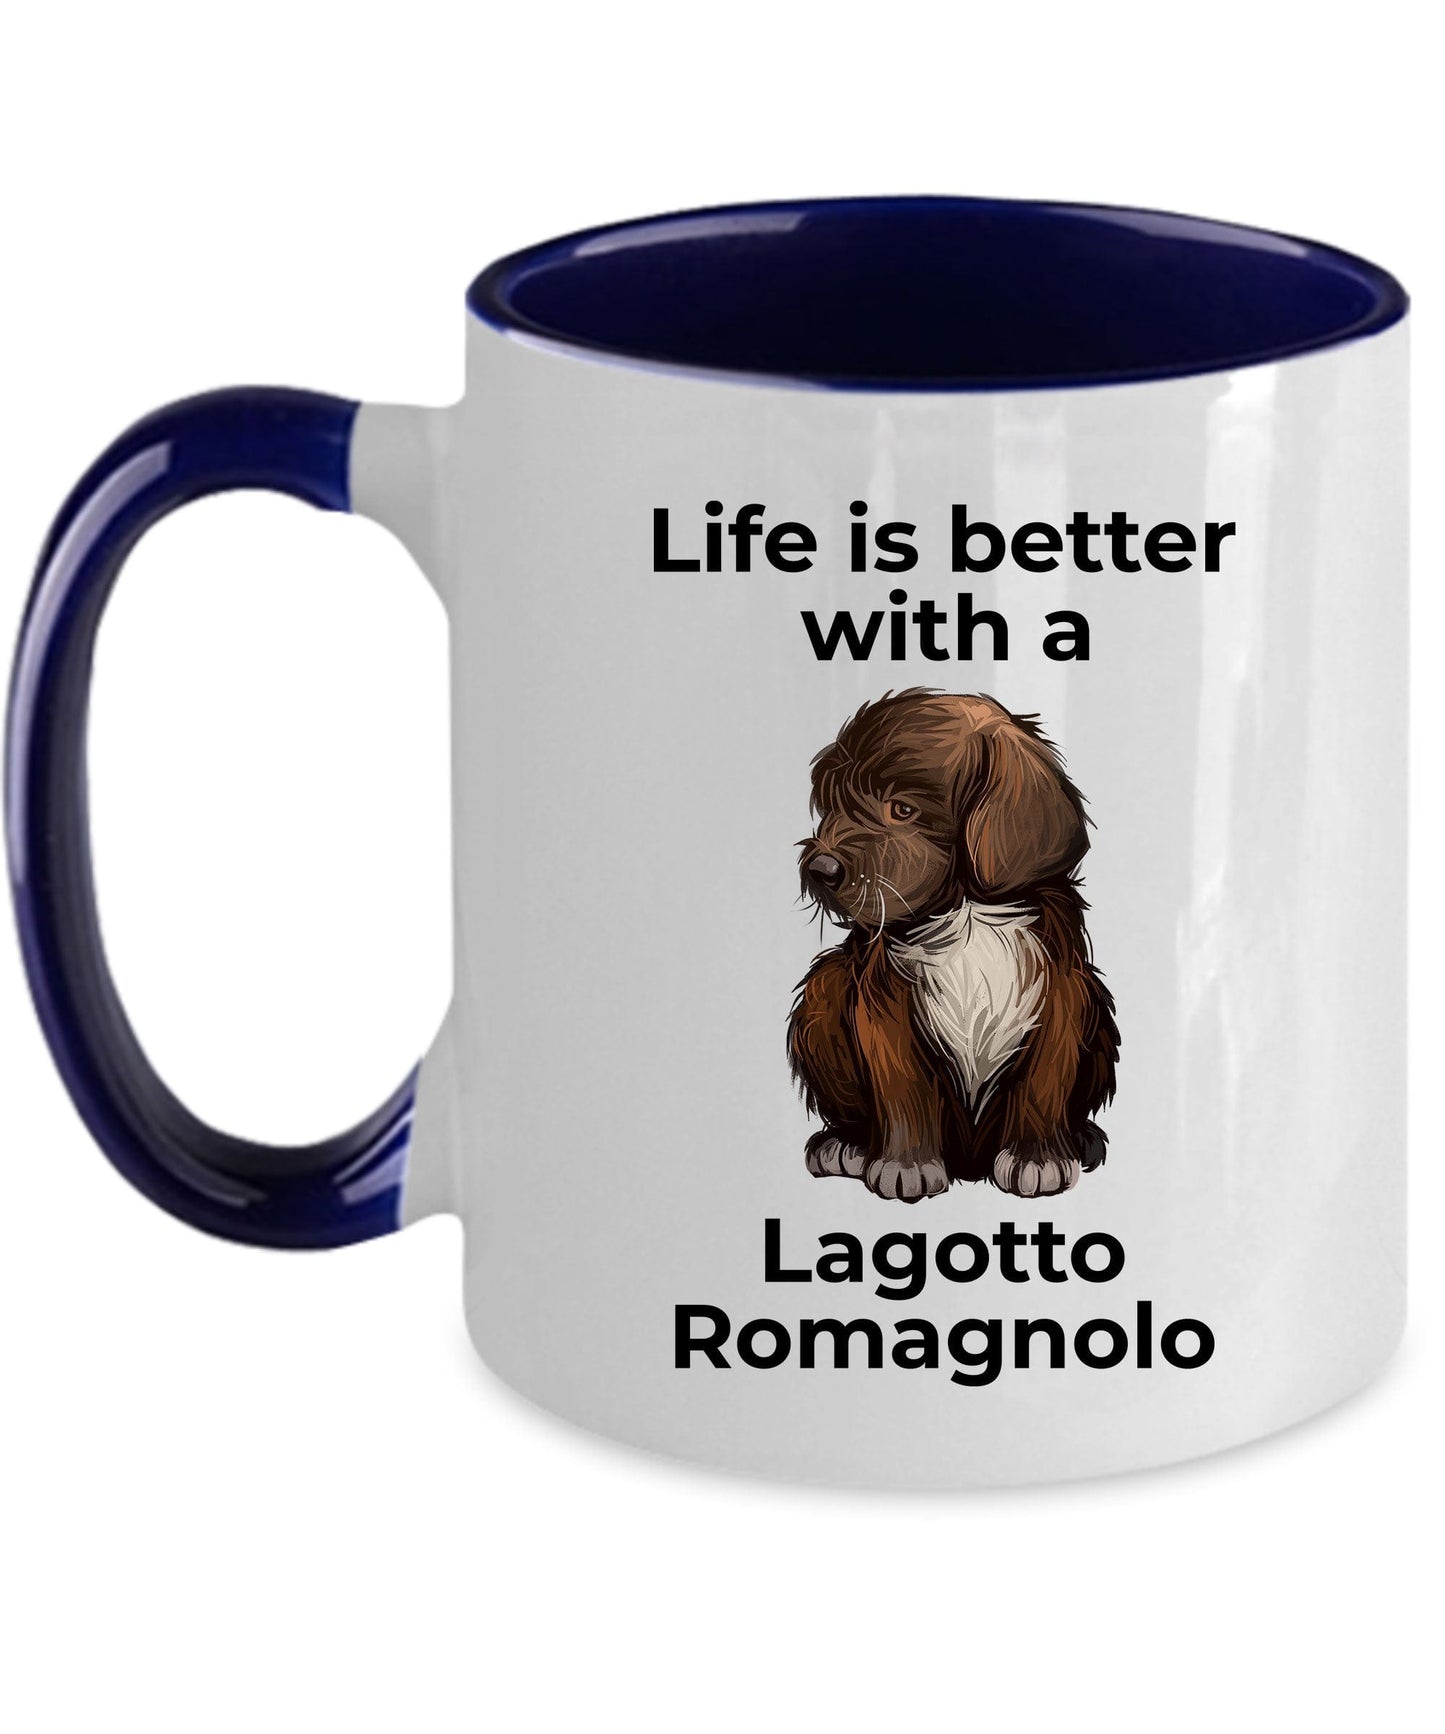 Lagotto Romagnolo Dog Lover ceramic coffee mug - Life is better with a Lagotto Romagolo